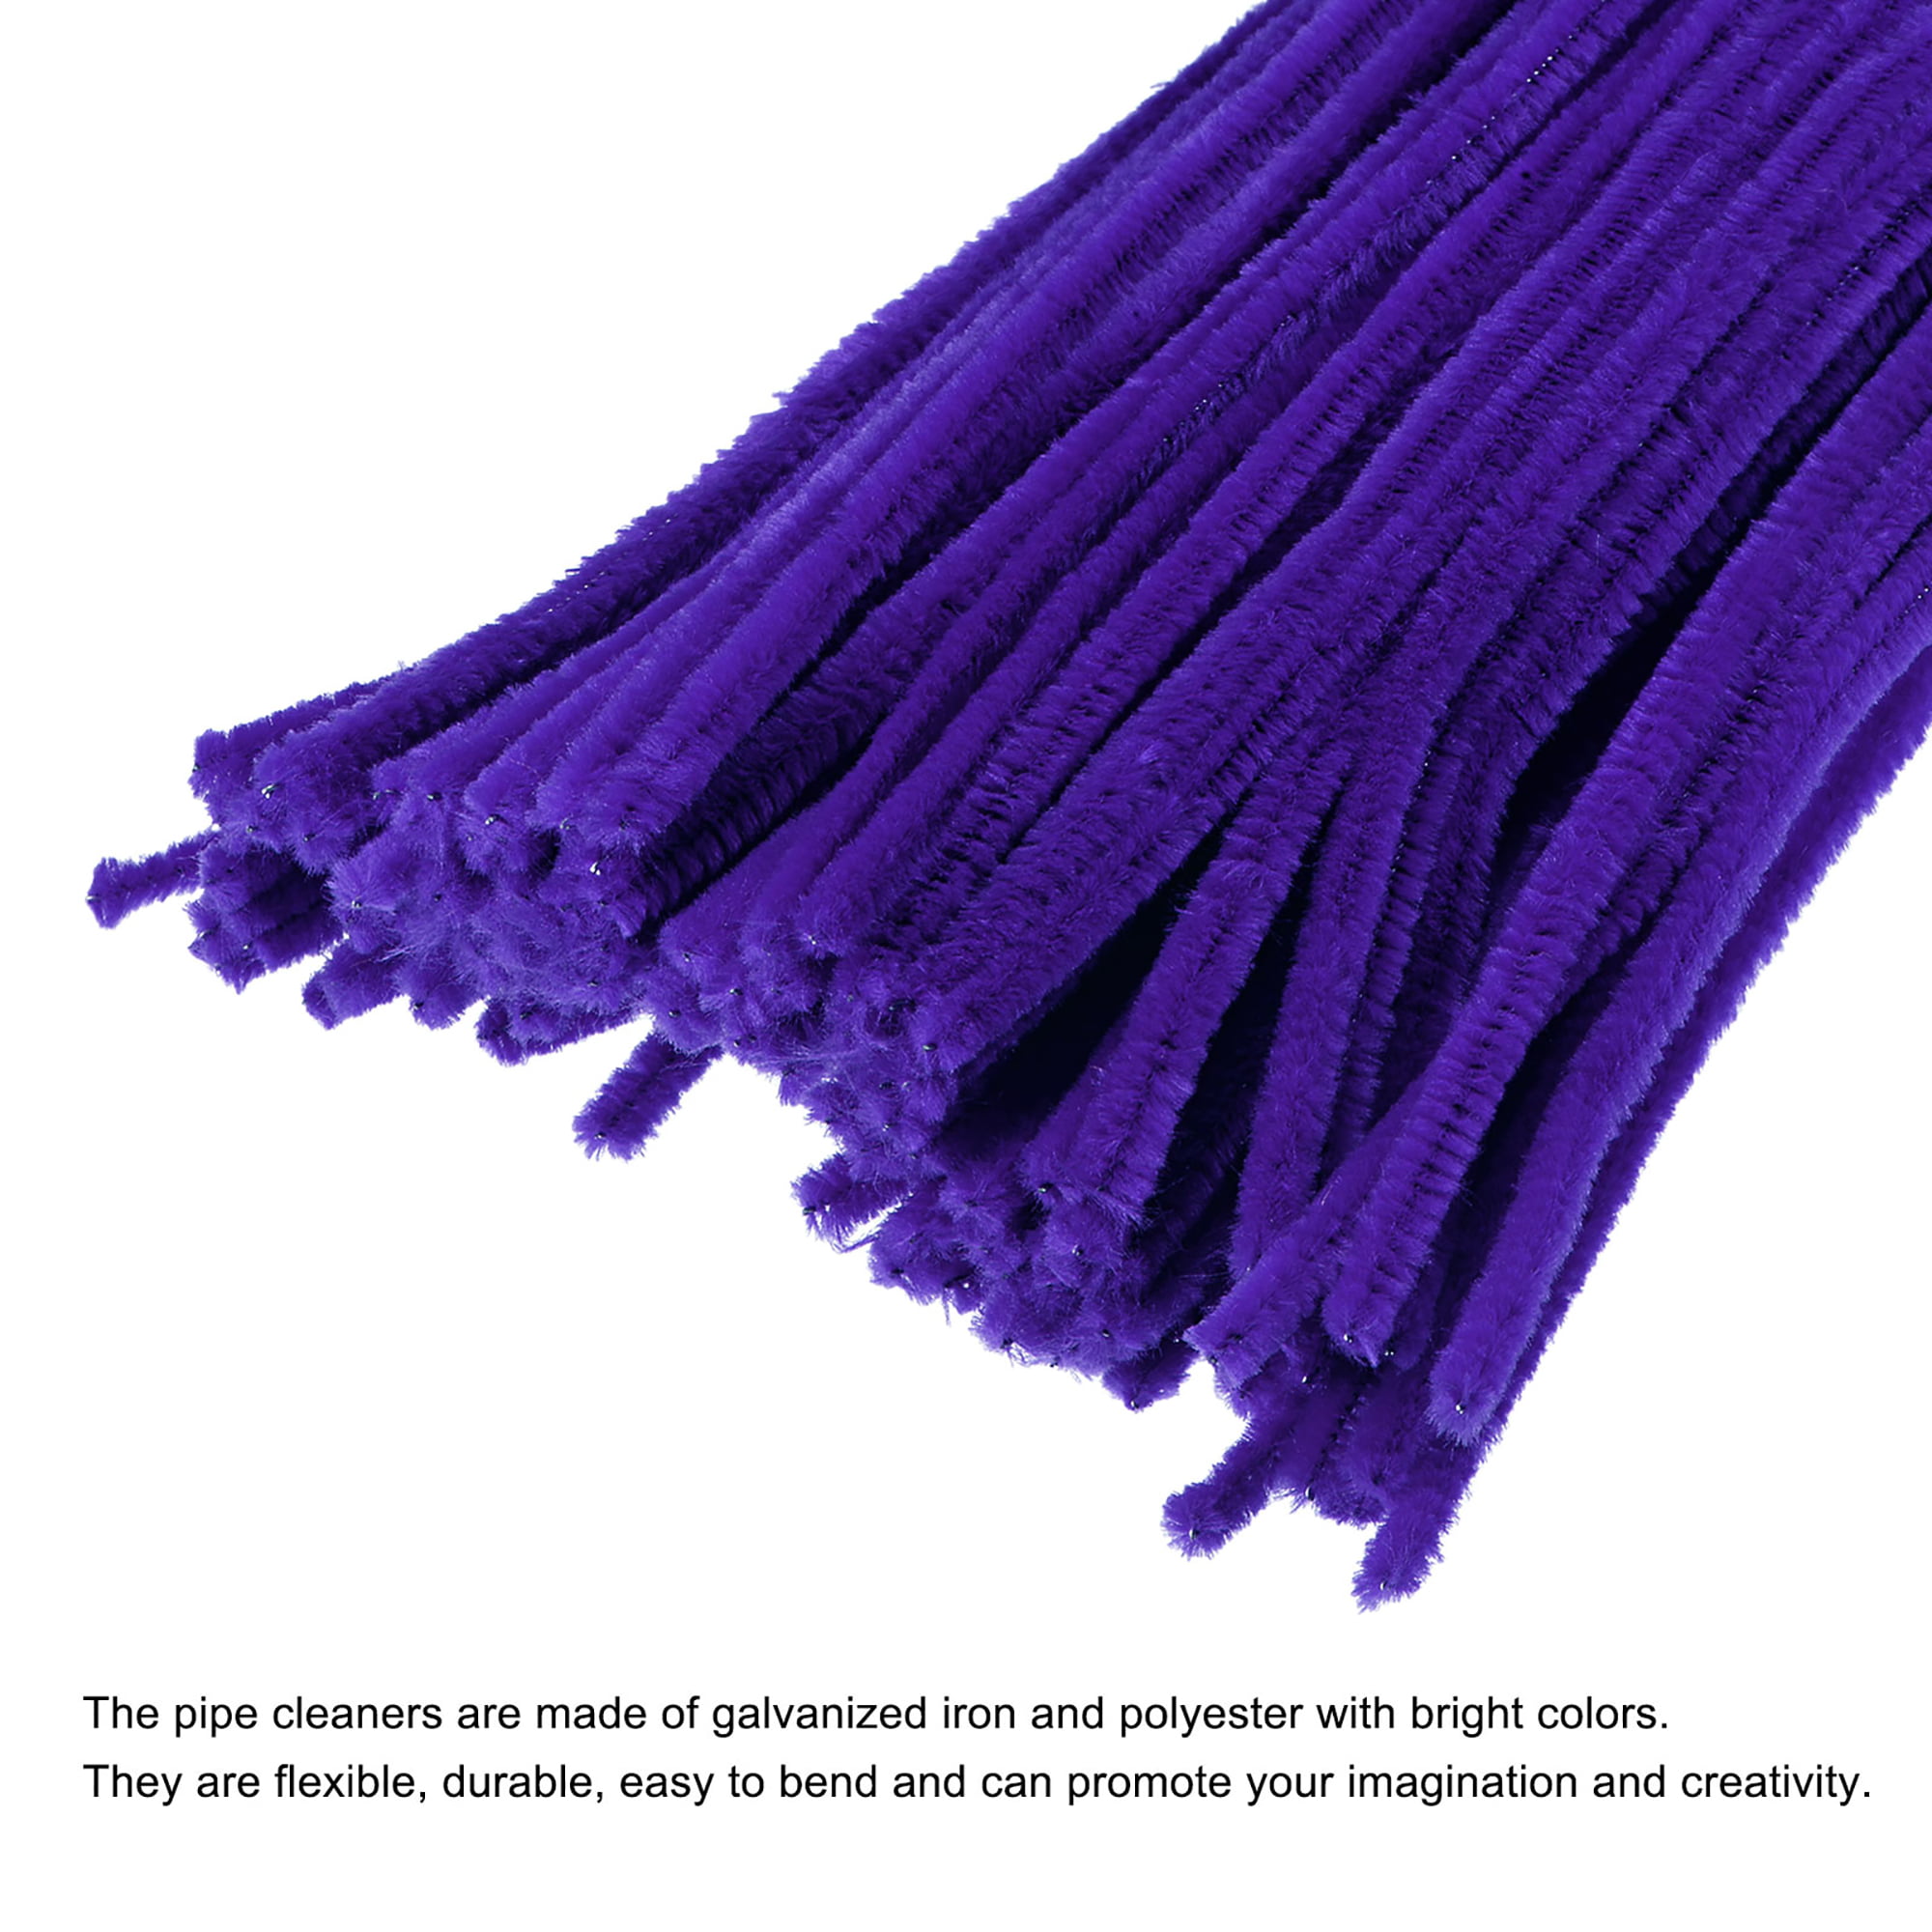  Pack of 350 Purple Pipe Cleaners. Fuzzy Stick Chenille Stems  for Arts and Crafts Shapes, Flowers, Animals, Figures and More - Size: 12  Inches Long x 6 mm Dia. : Health & Household